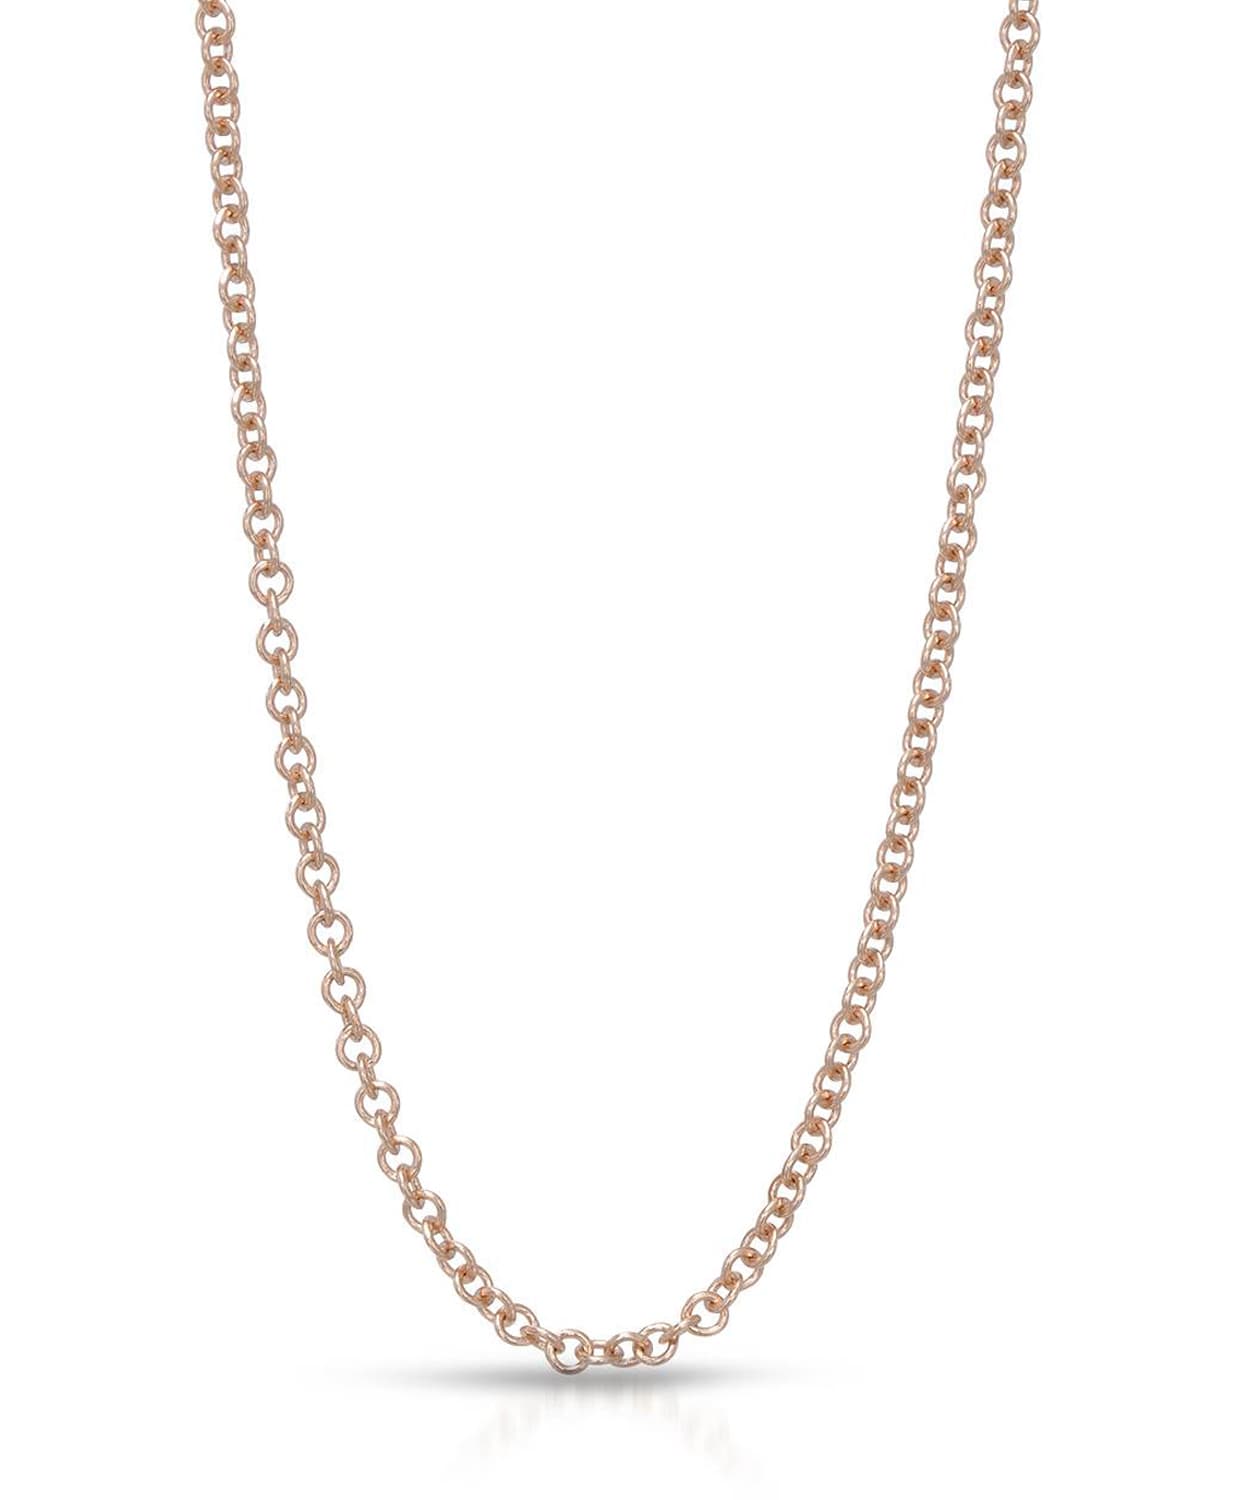 ESEMCO 1.8mm 14K Rose Gold Rolo Chain View 1